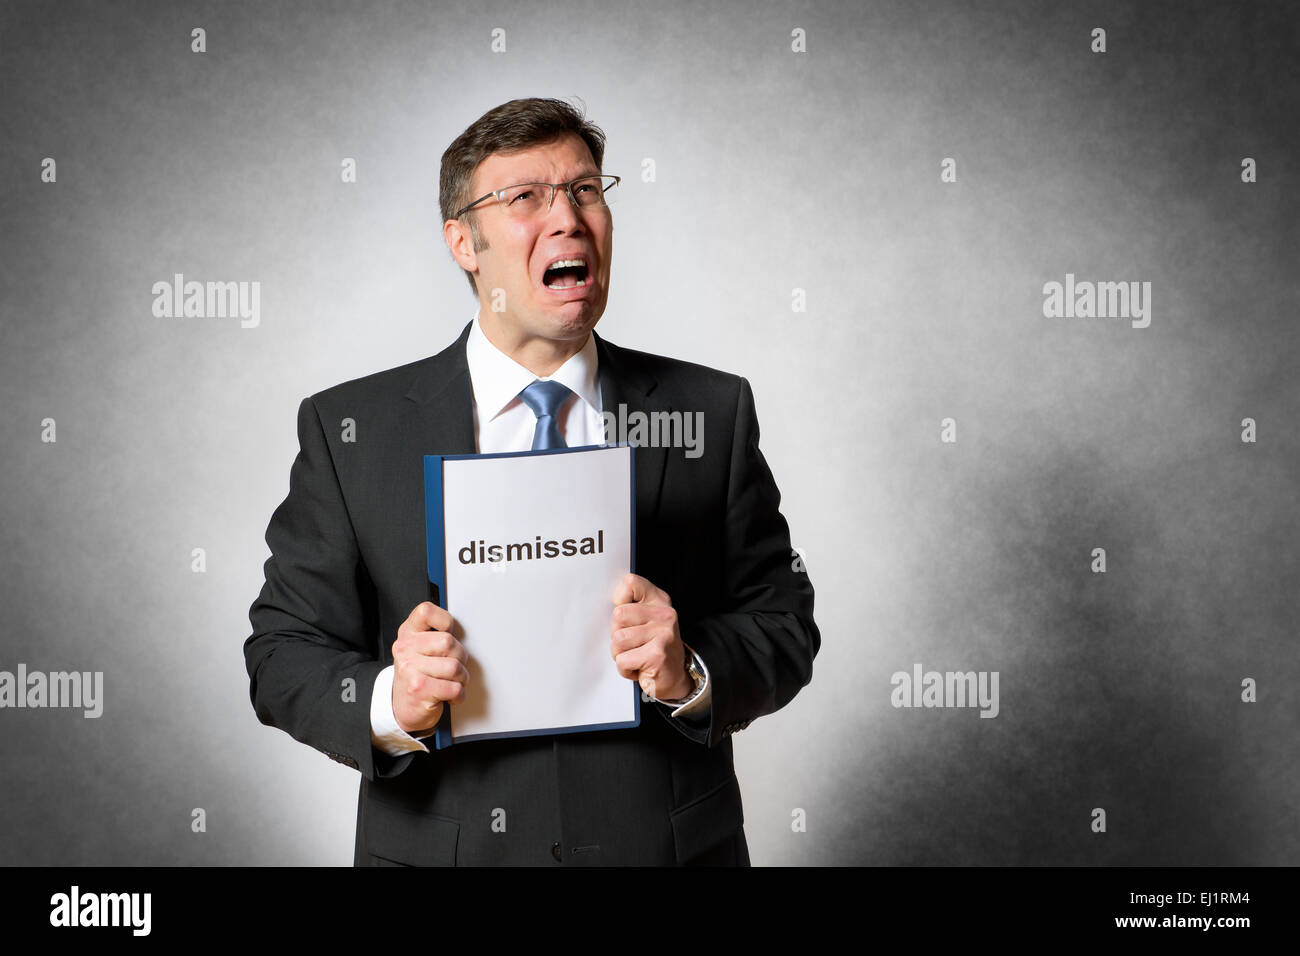 Crying business man with german dismissal Stock Photo